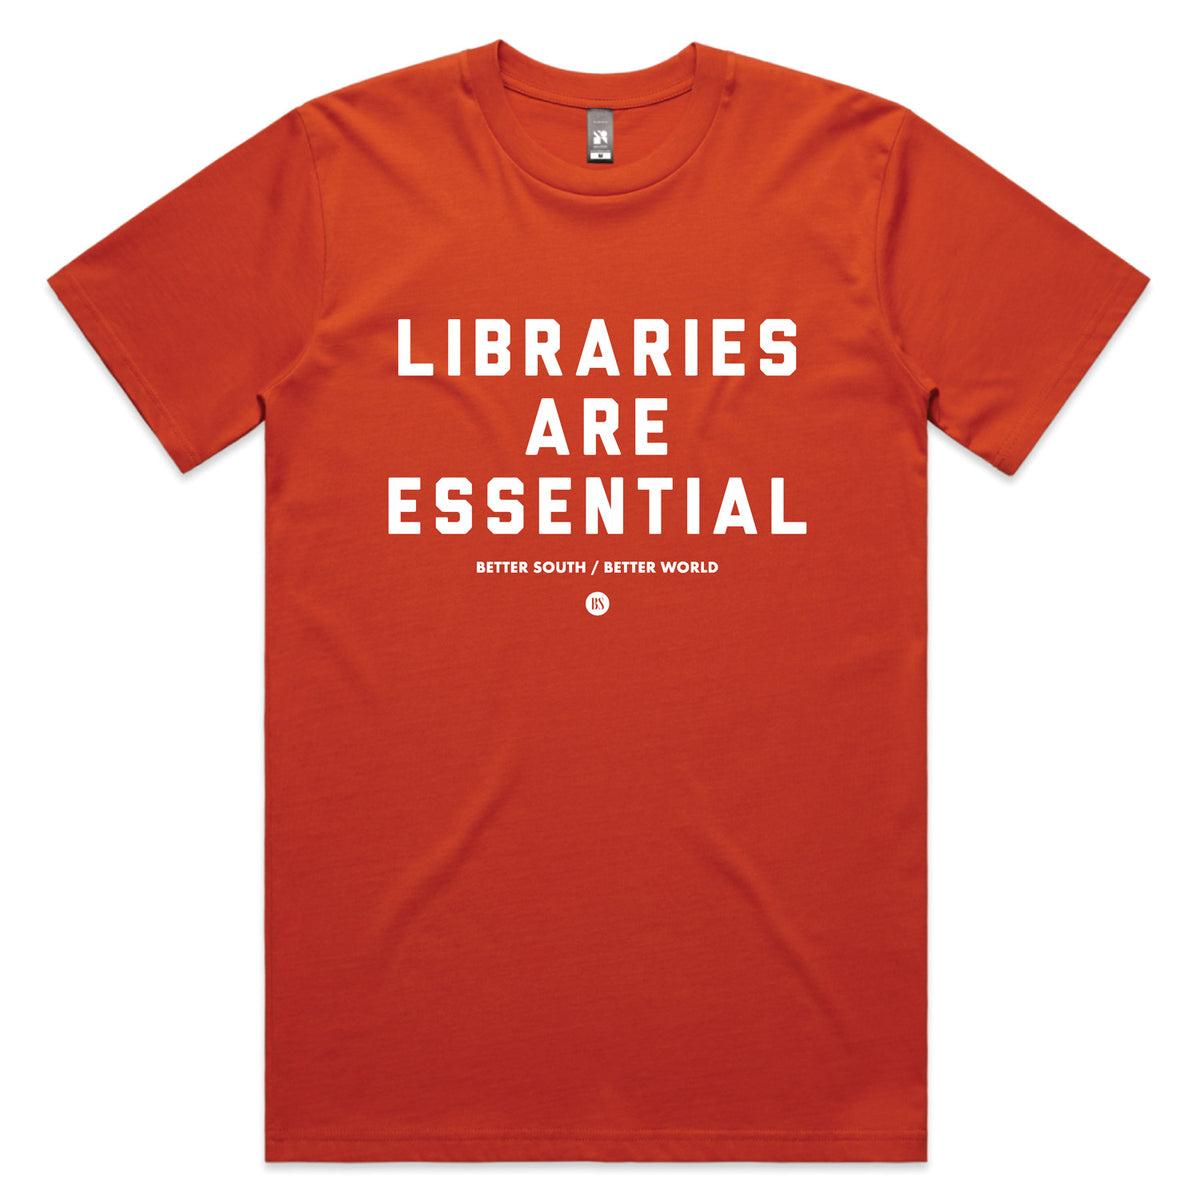 Libraries Are Essential - t-shirt (red)